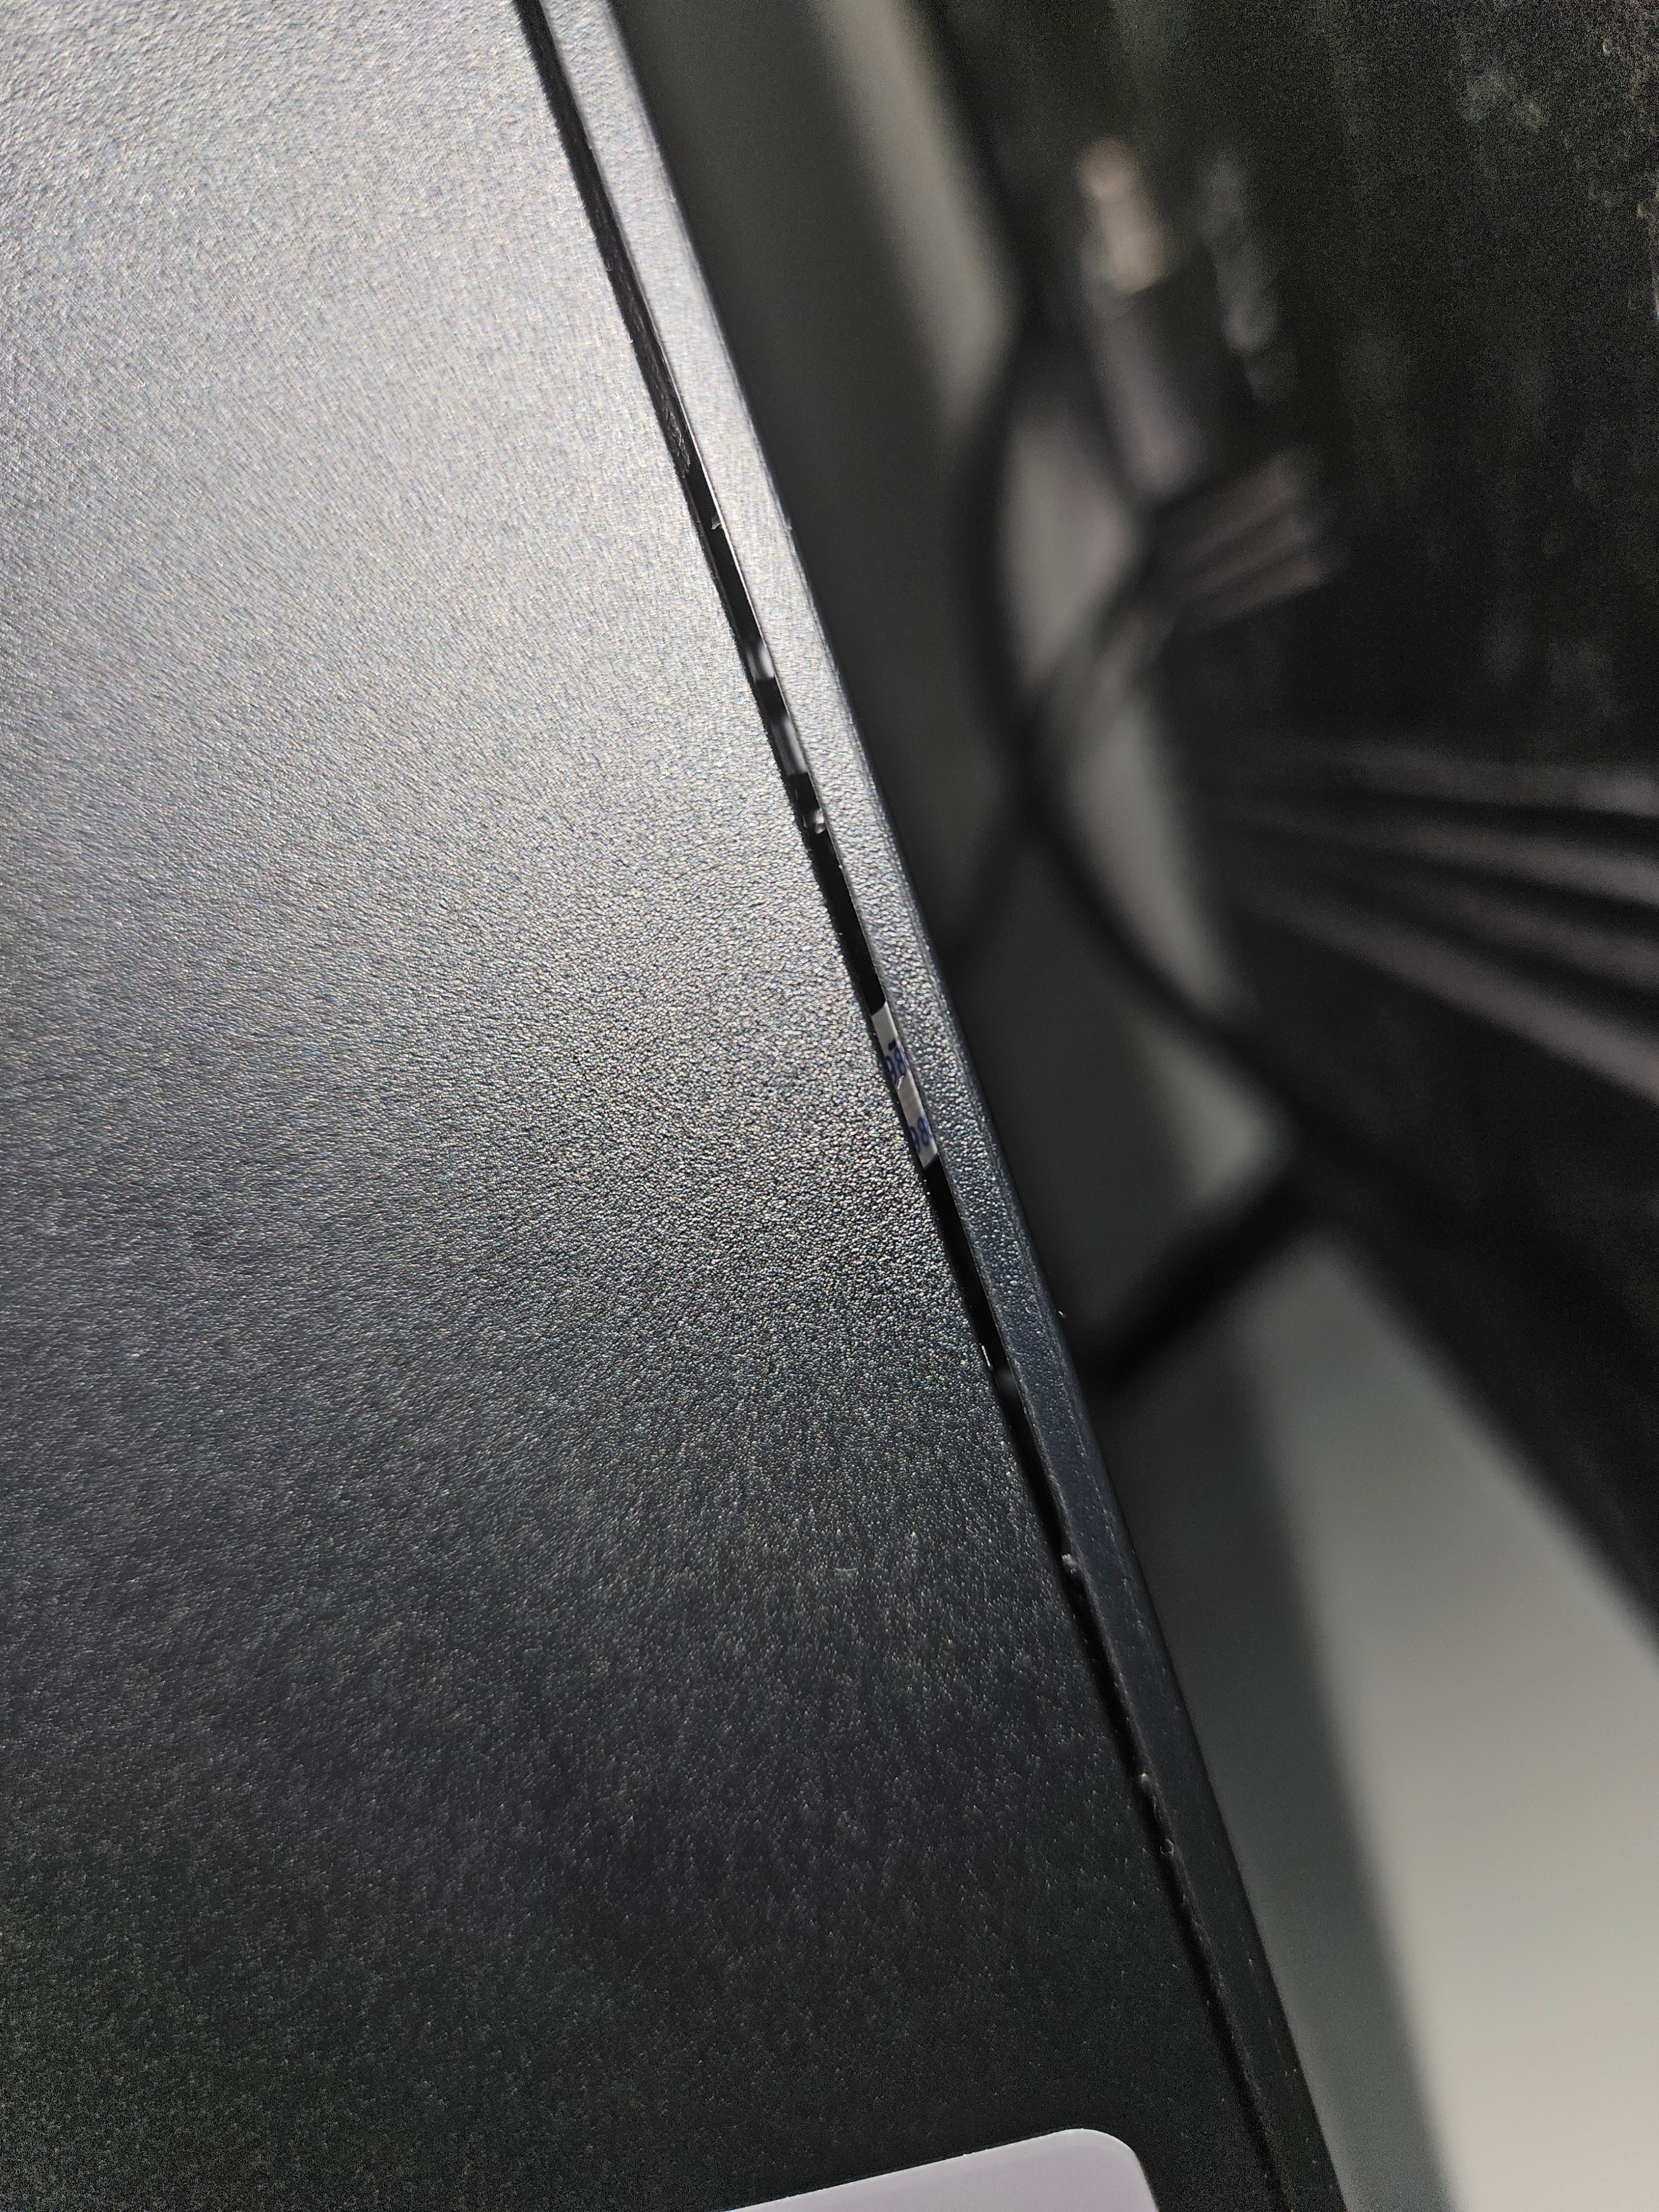 Series X Chassis Defect? [​IMG]